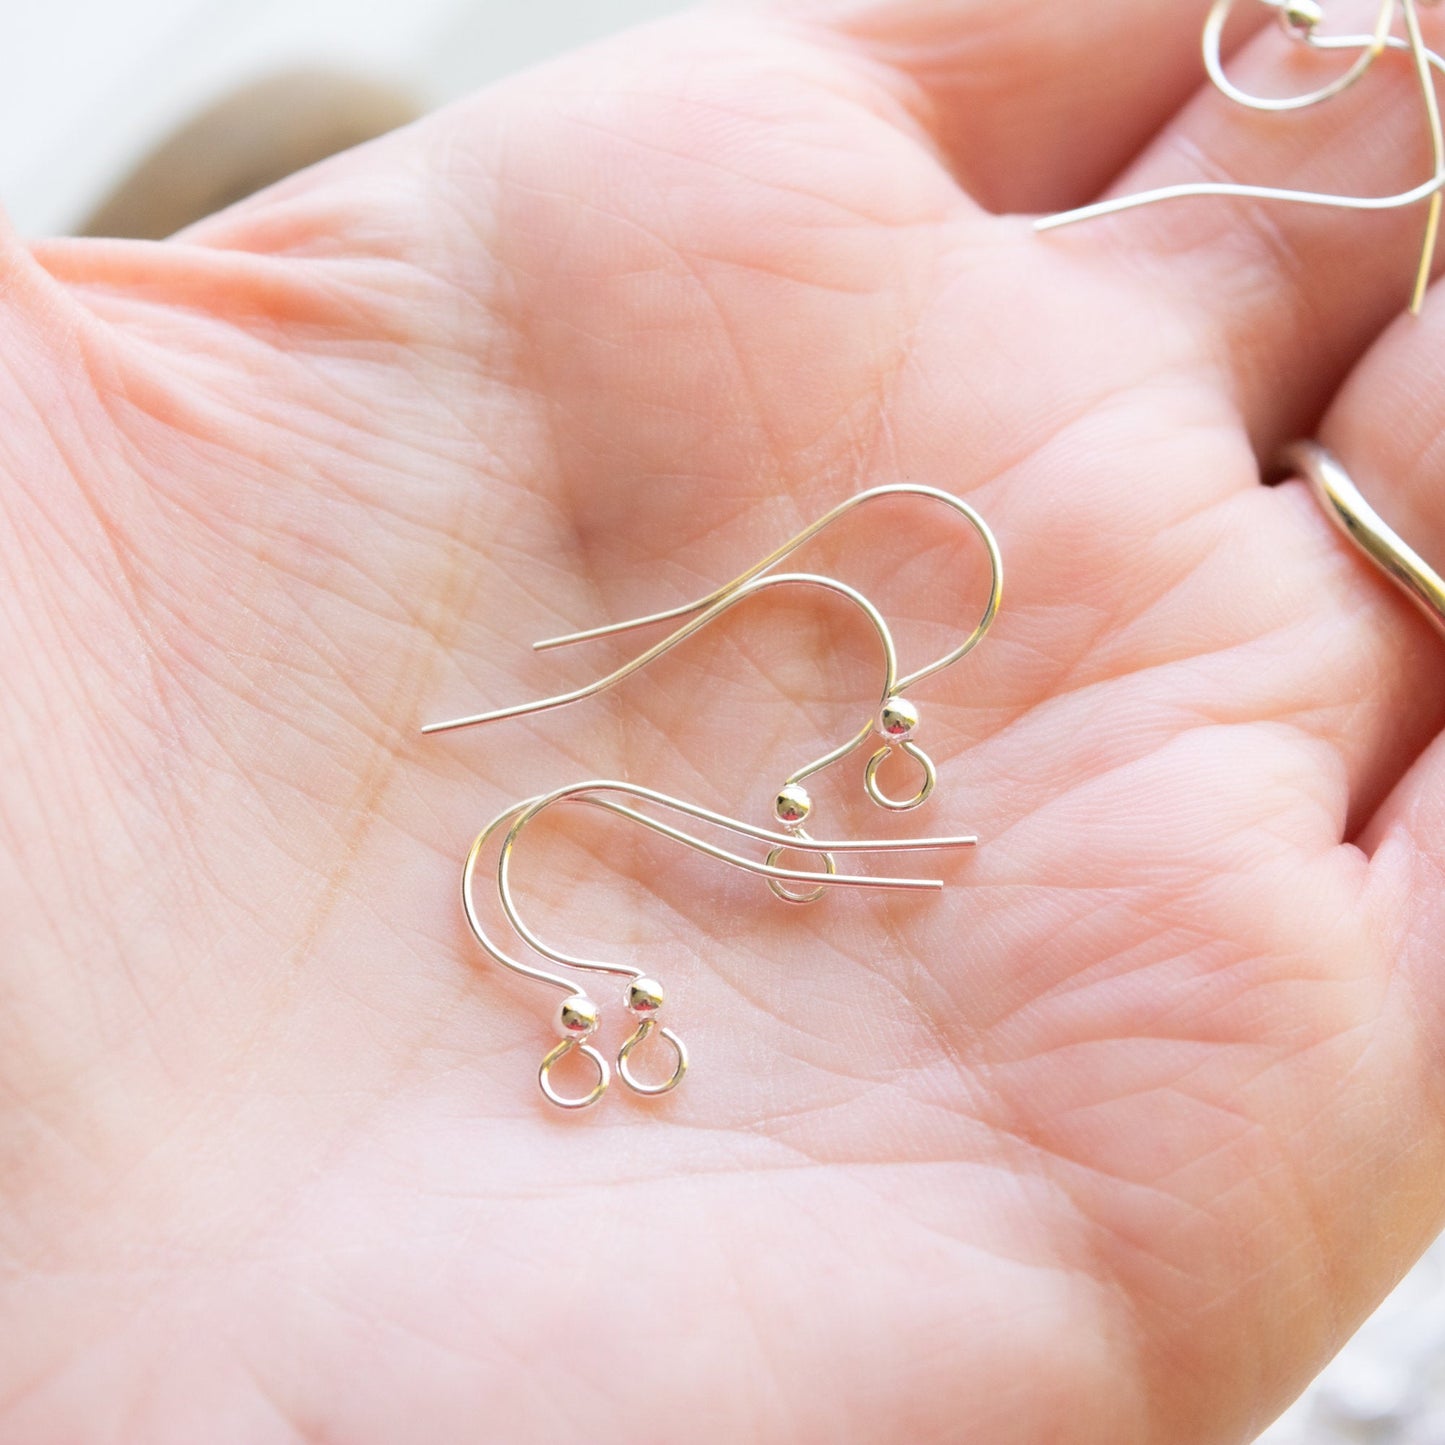 17mm Earring Wires with 2mm Bead Detail and Open Loop, Silver or Gold Plated